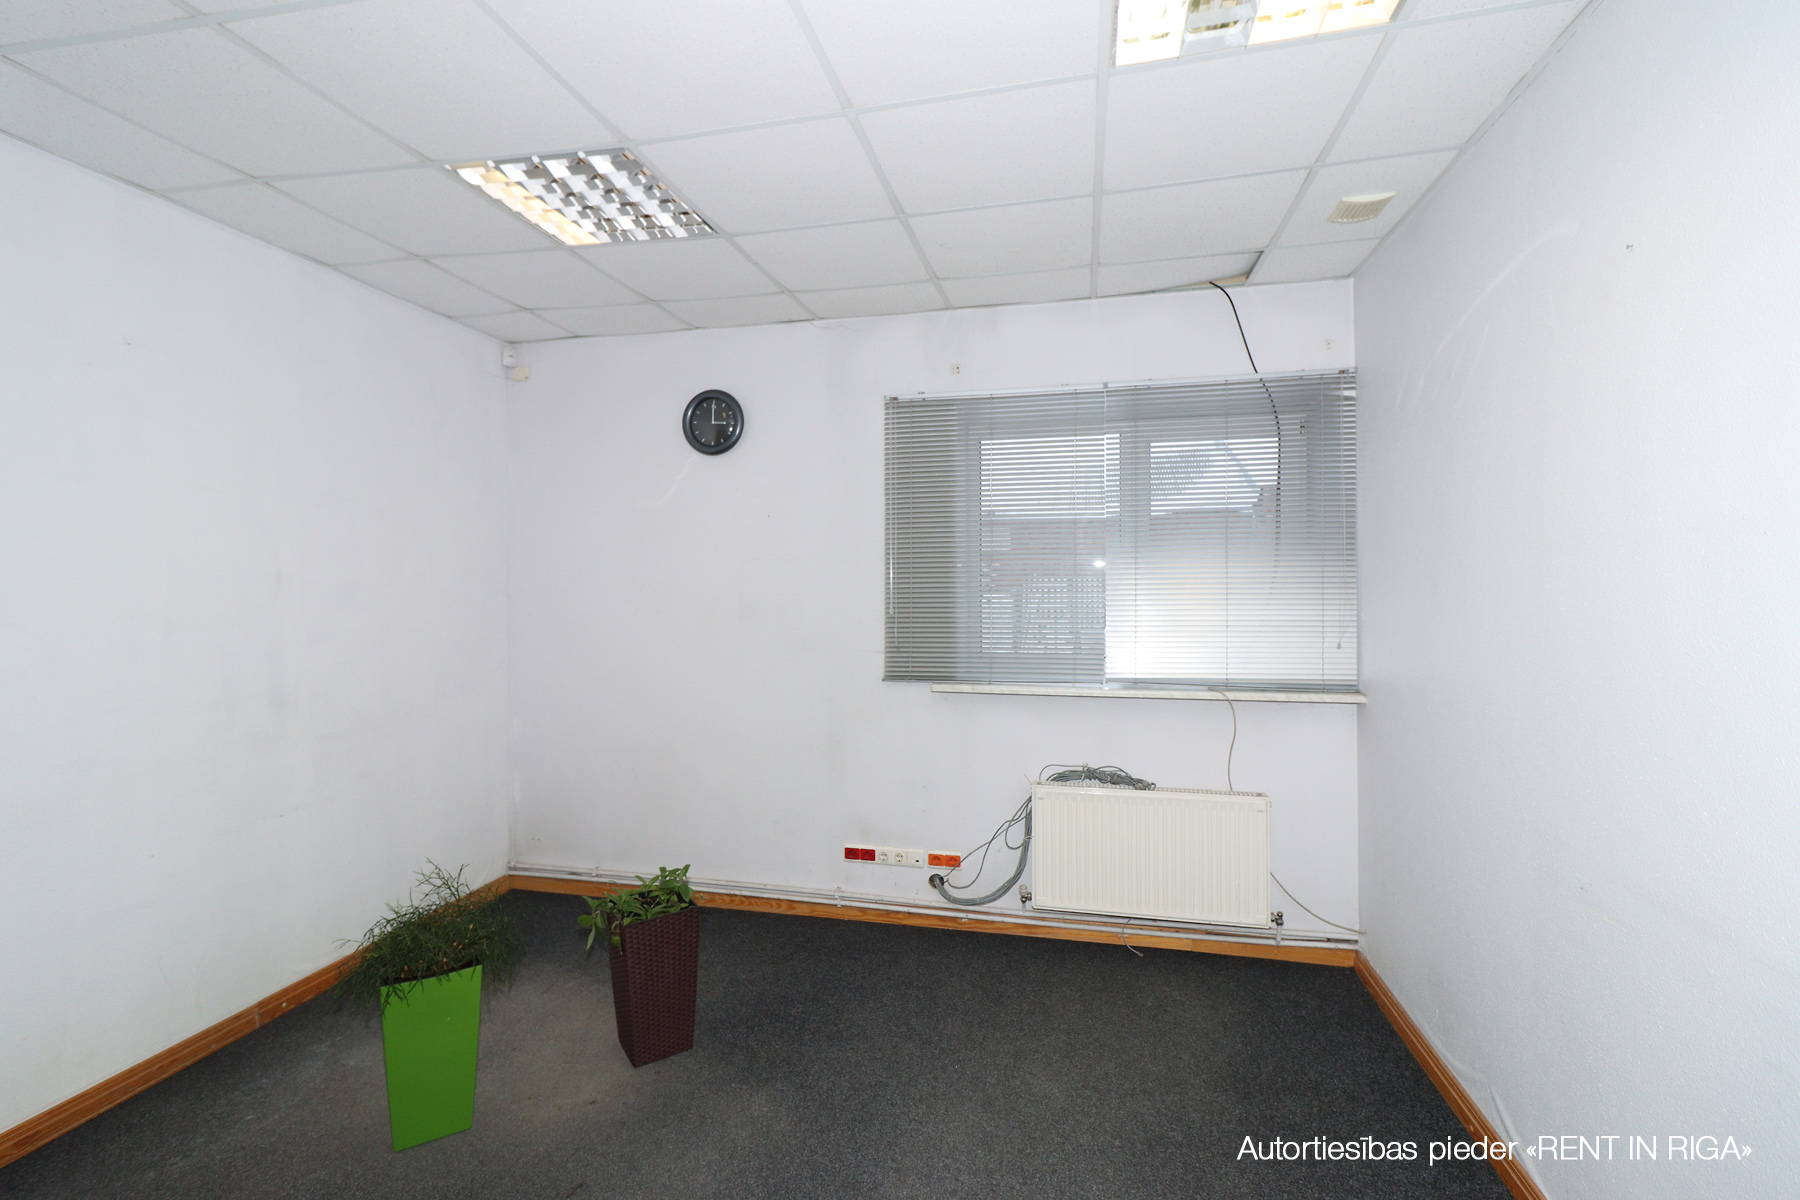 Office for rent, Piedrujas street - Image 1